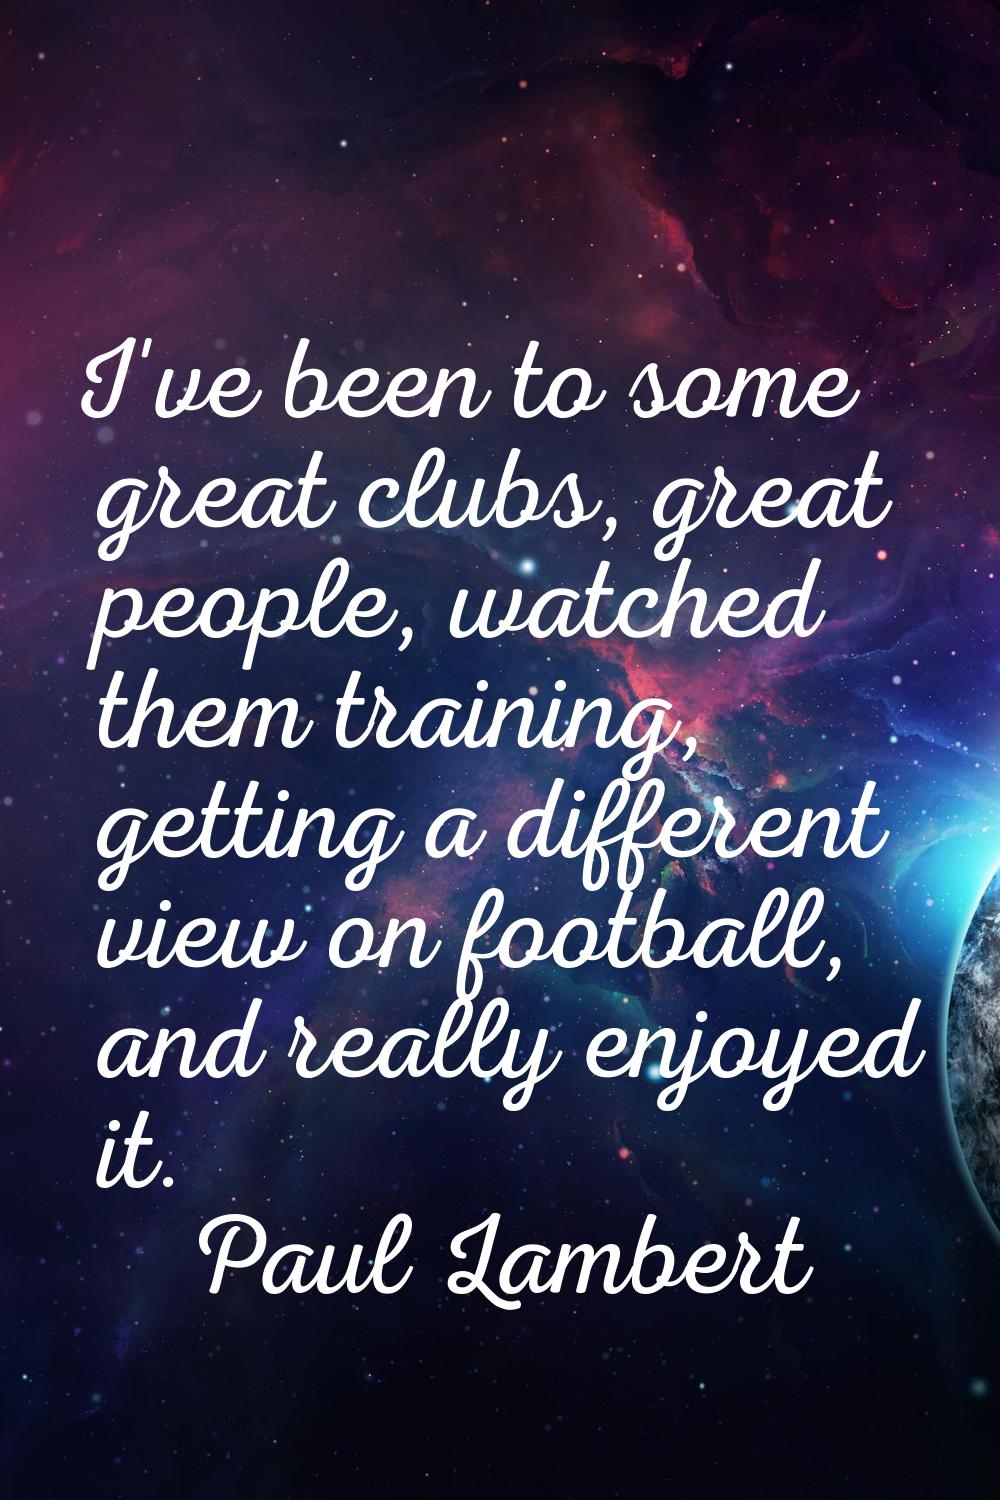 I've been to some great clubs, great people, watched them training, getting a different view on foo